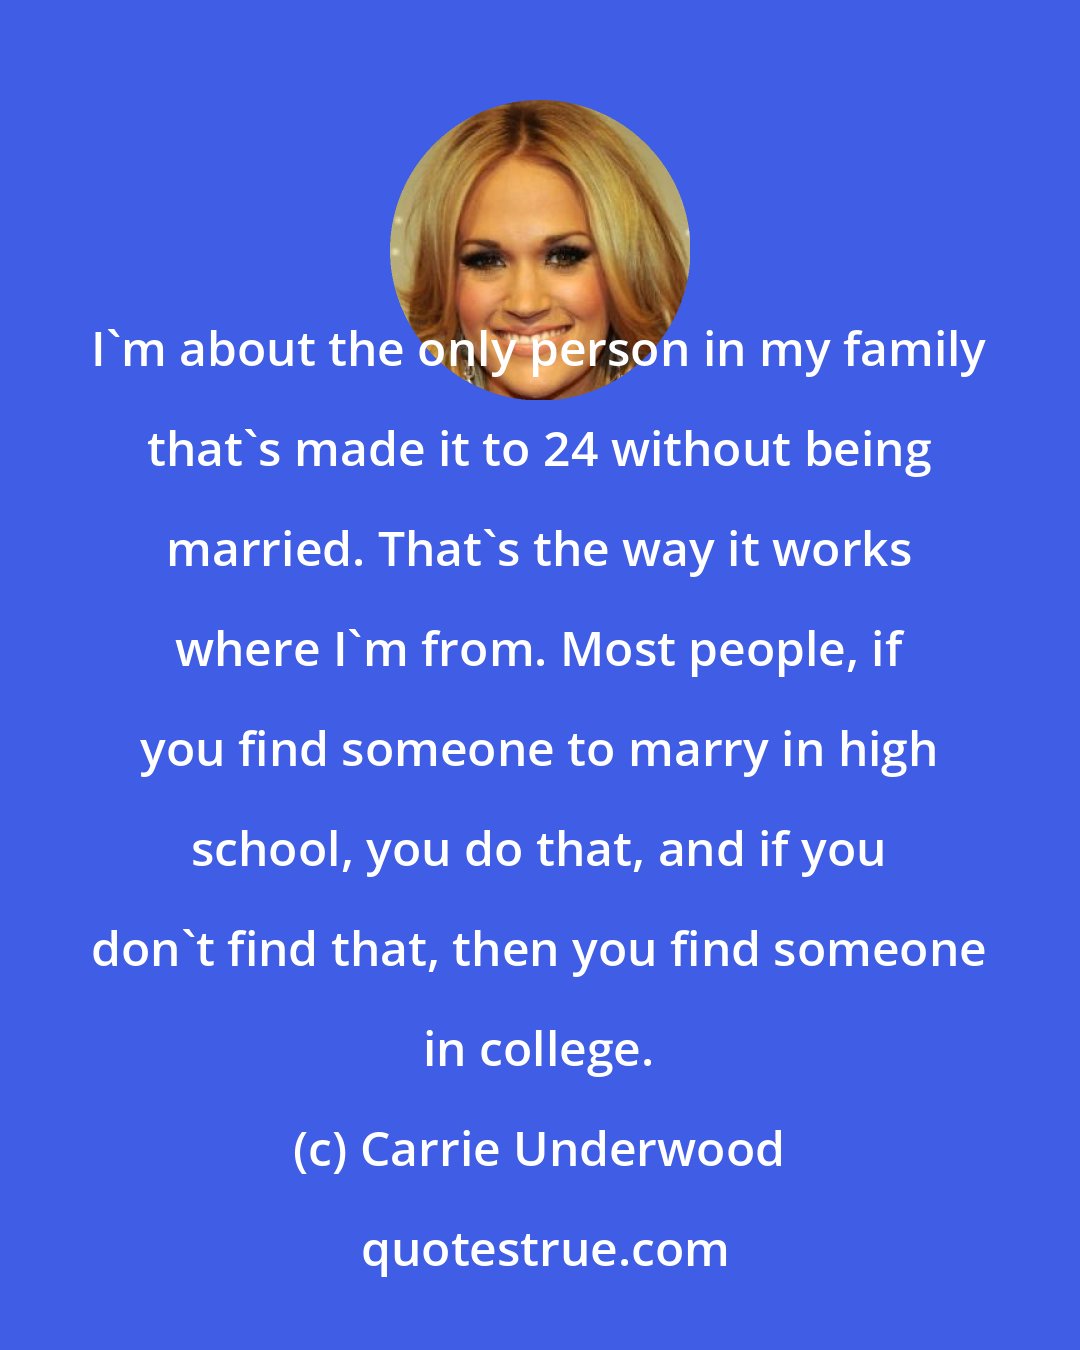 Carrie Underwood: I'm about the only person in my family that's made it to 24 without being married. That's the way it works where I'm from. Most people, if you find someone to marry in high school, you do that, and if you don't find that, then you find someone in college.